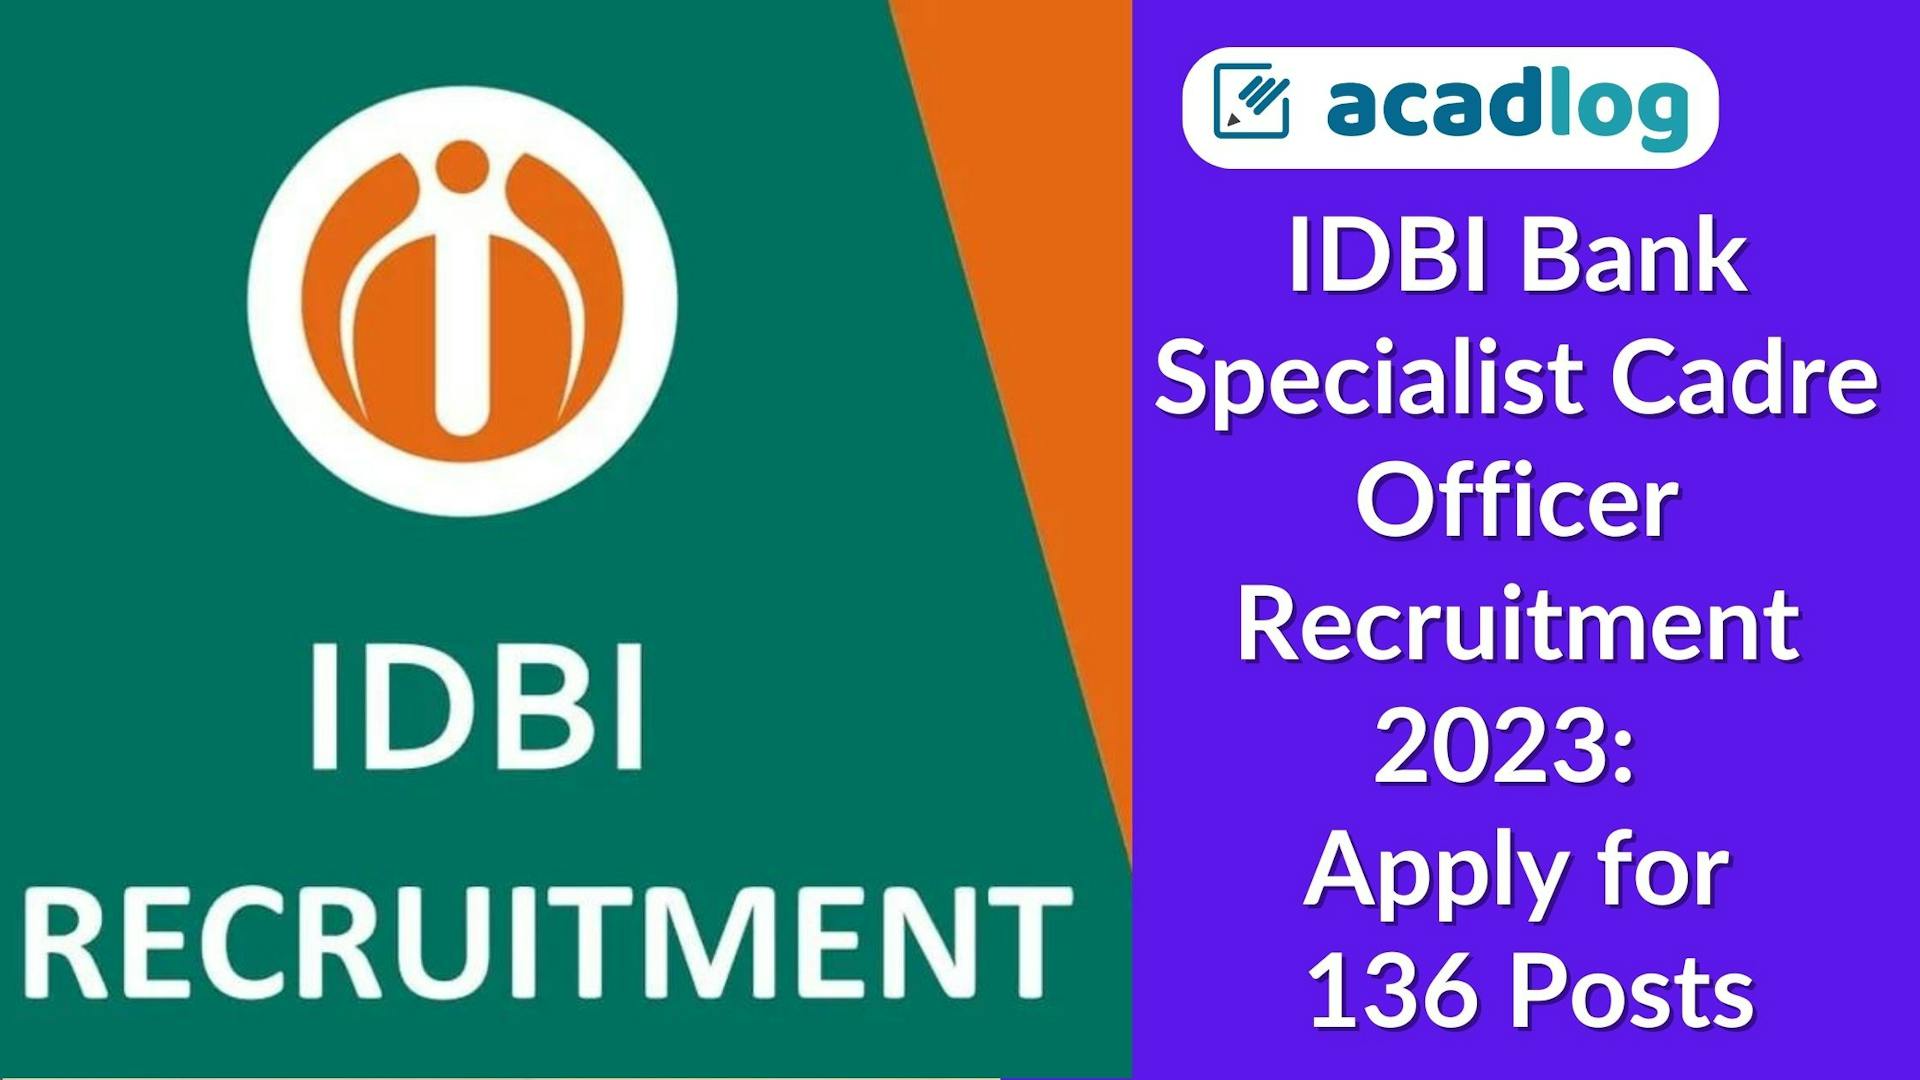 IDBI Bank Specialist Cadre Officer Recruitment 2023: Apply for 136 Posts